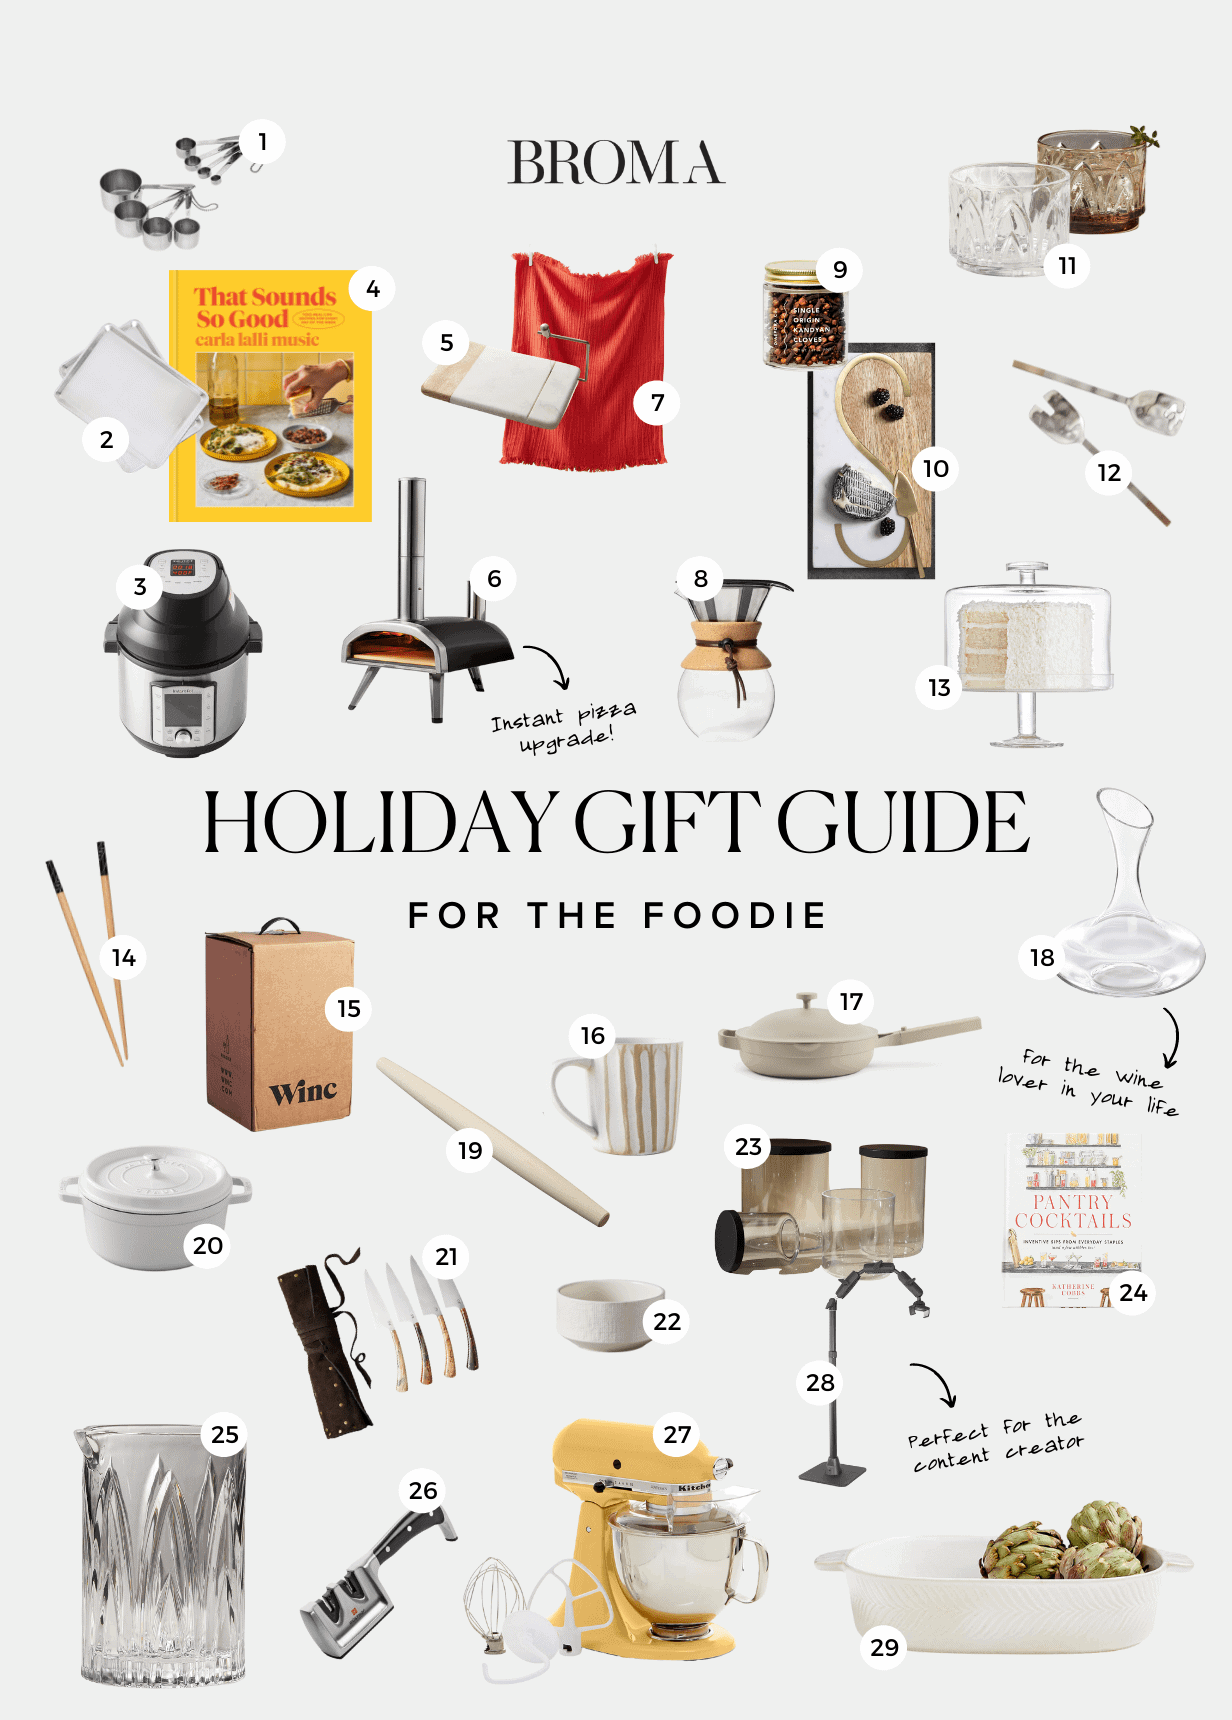 The 2021 Holiday Gift Guide: For the Foodie - Broma Bakery